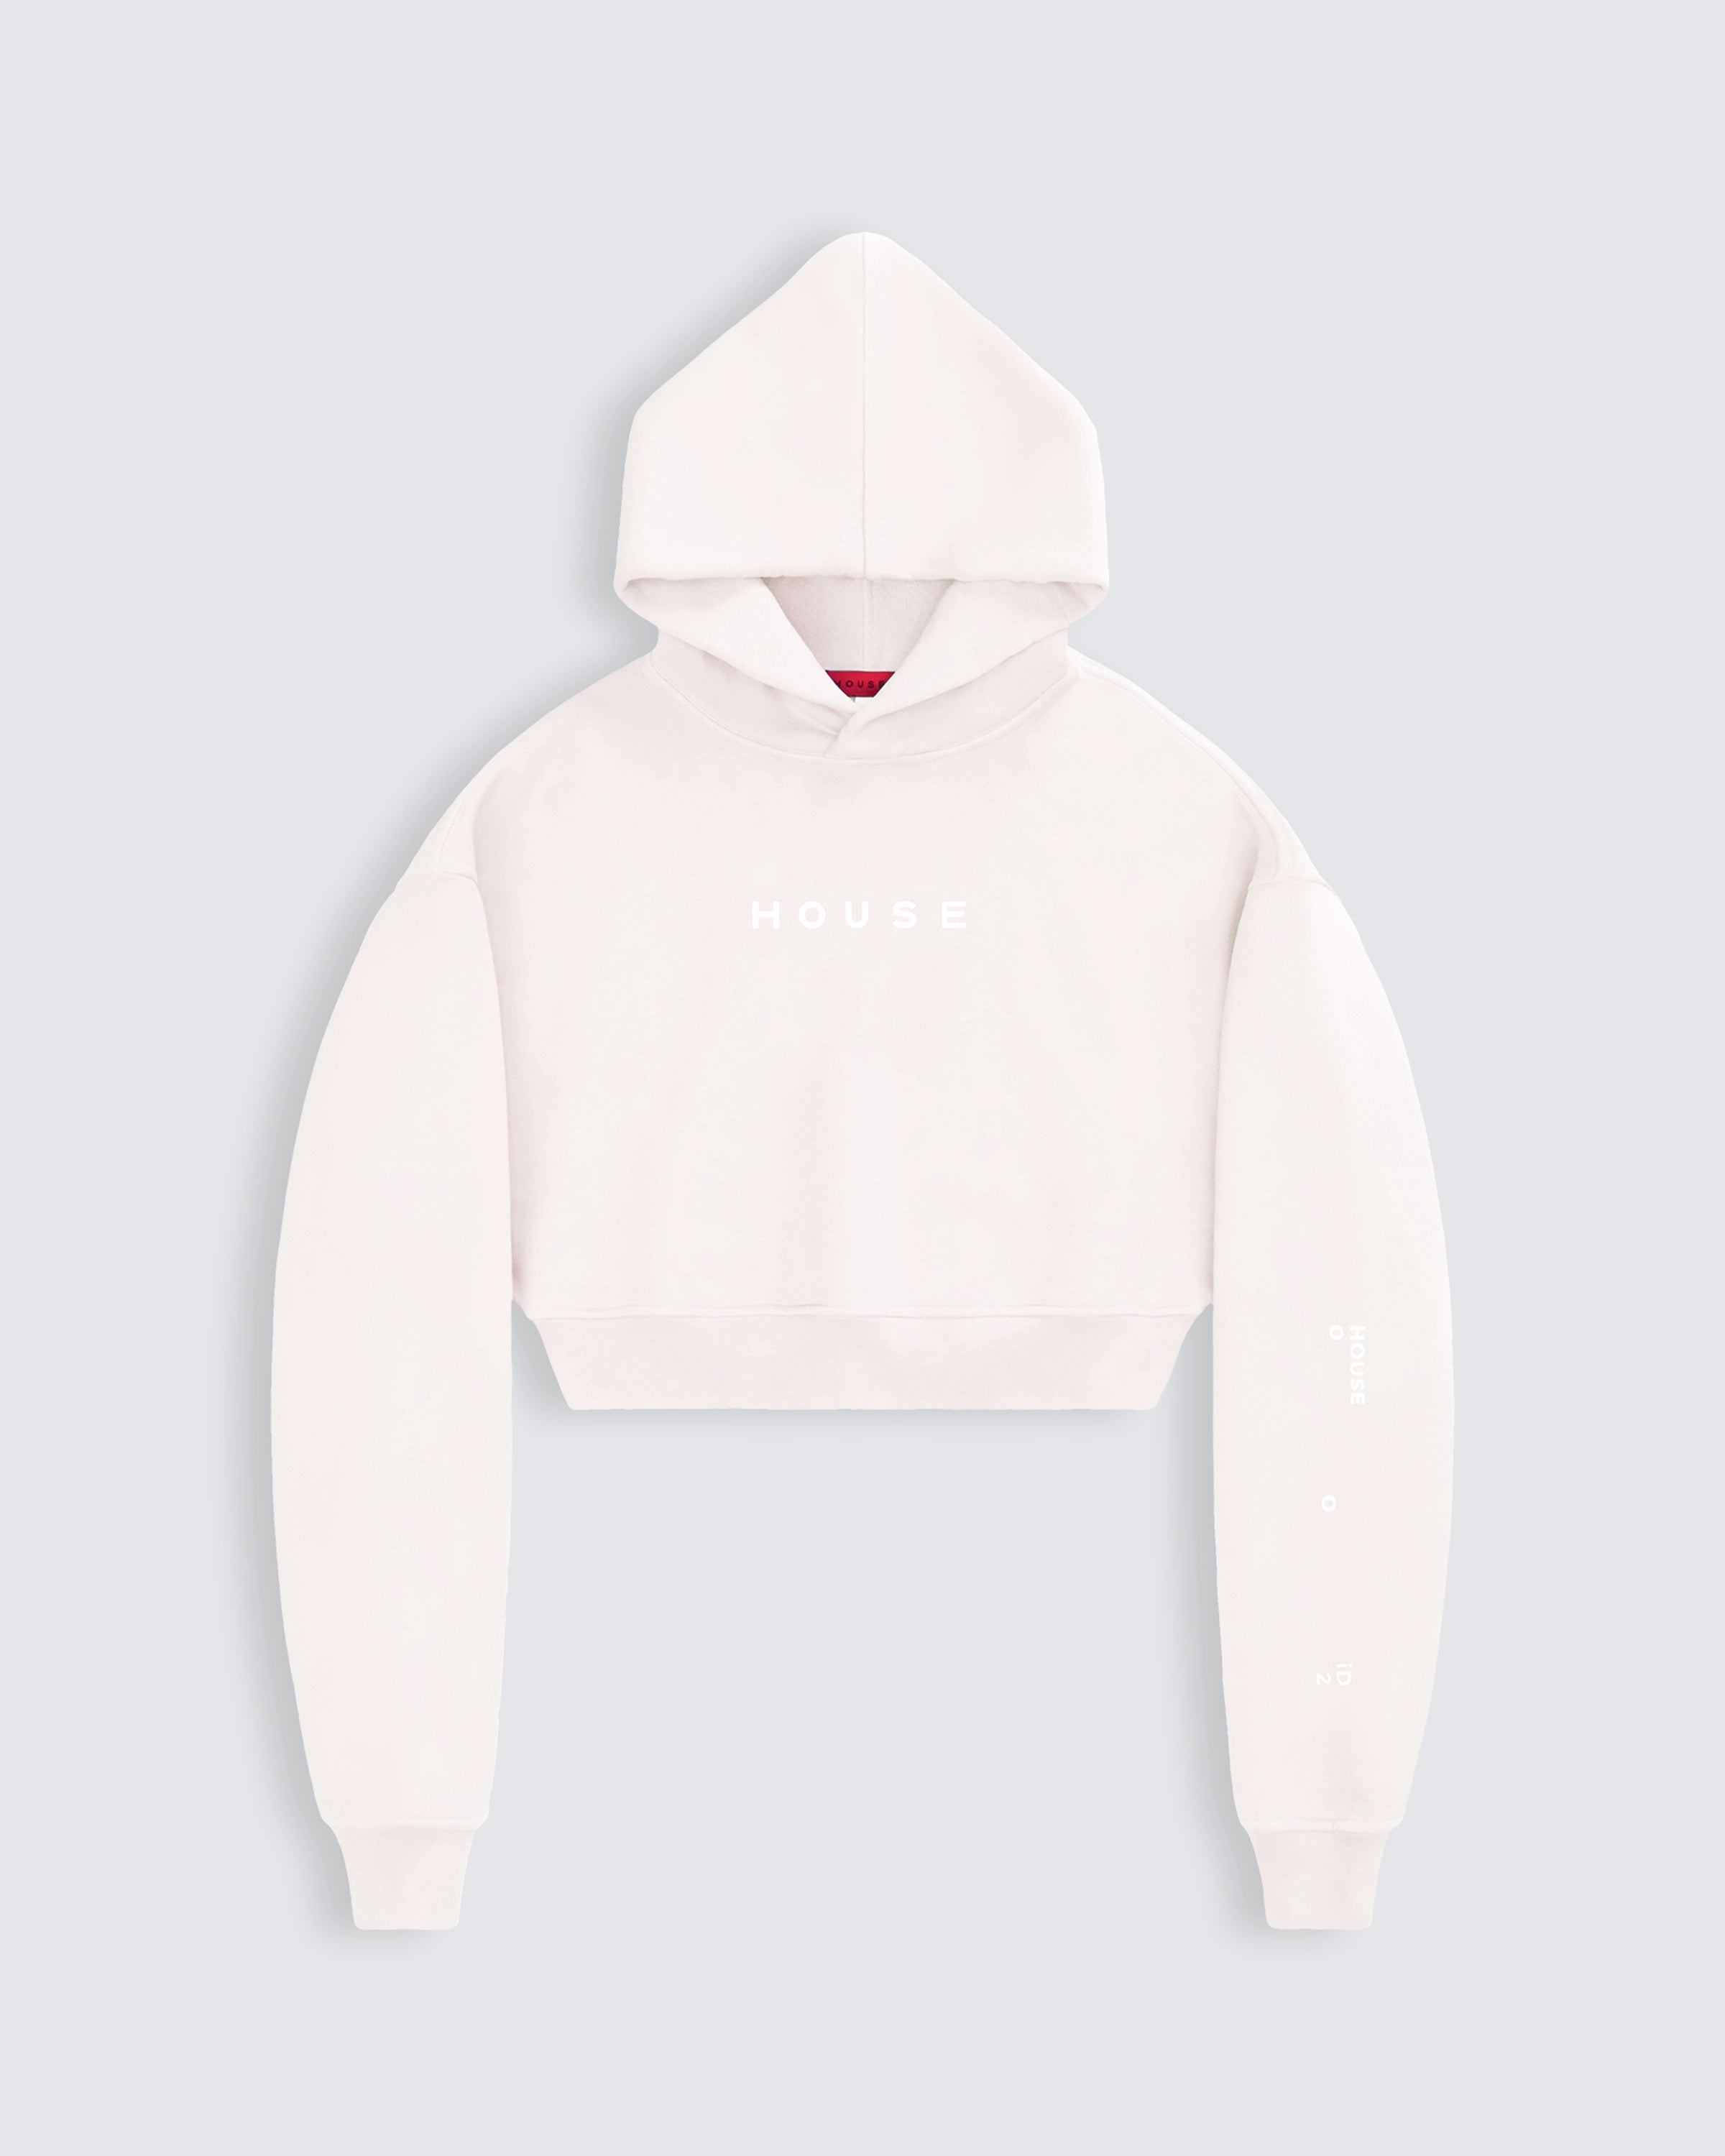 Womens cropped hoodie in off white